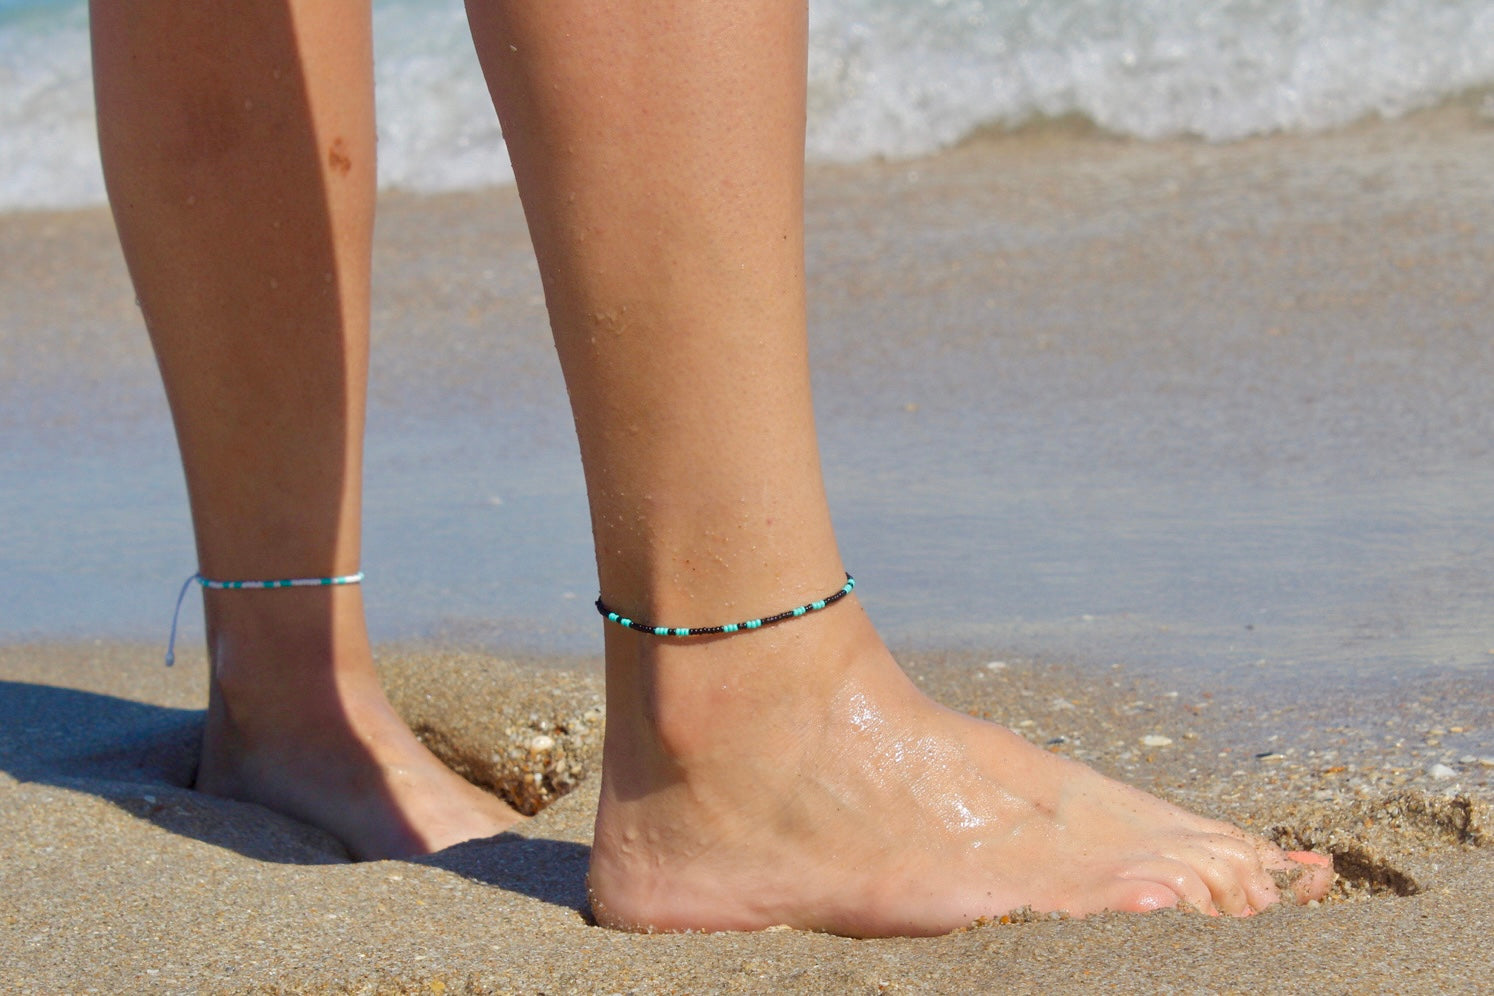 Stainless Steel Anklet 10mm Ball Bead Ankle Bracelet Beach Gothic Foot  Jewelry - Etsy | Ankle bracelets beach, Beaded ankle bracelets, Ankle  bracelets